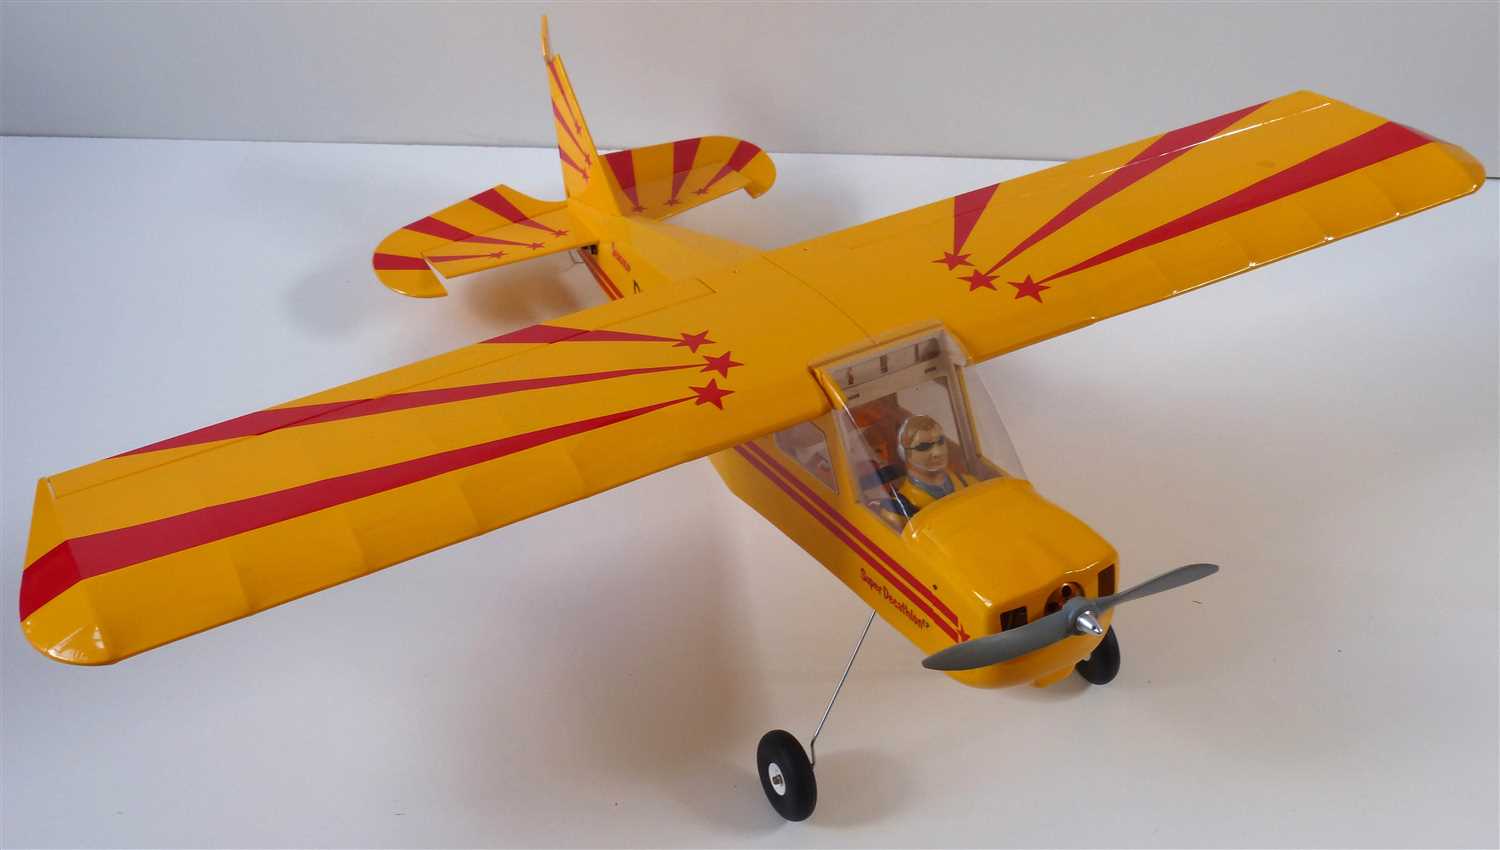 Lot 235 - Remote control Sup4 Decathlon plane (needs transmitter and receiver).